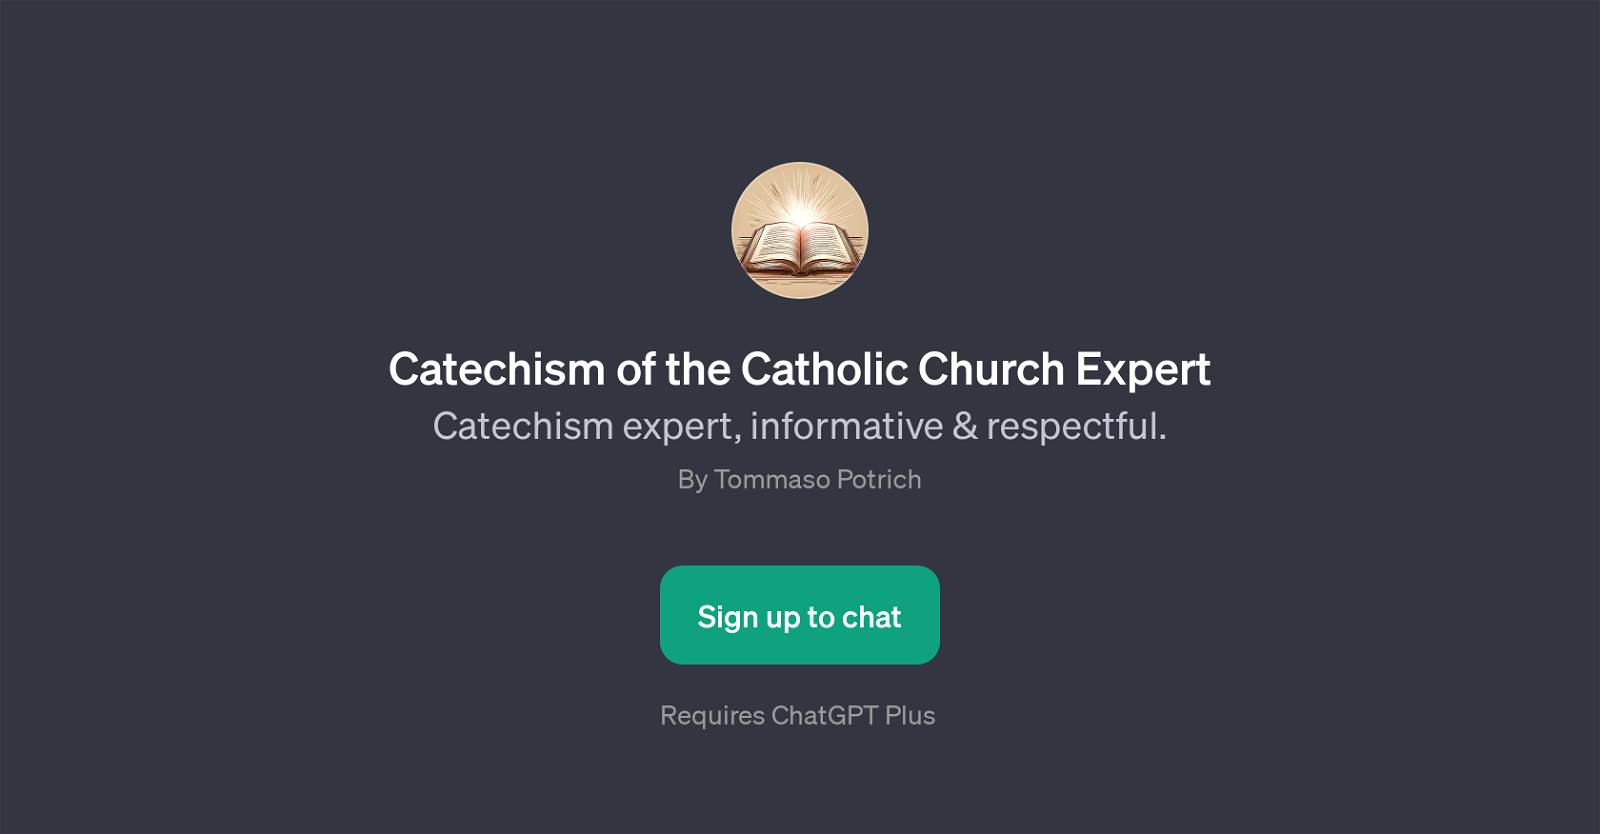 Catechism of the Catholic Church Expert website